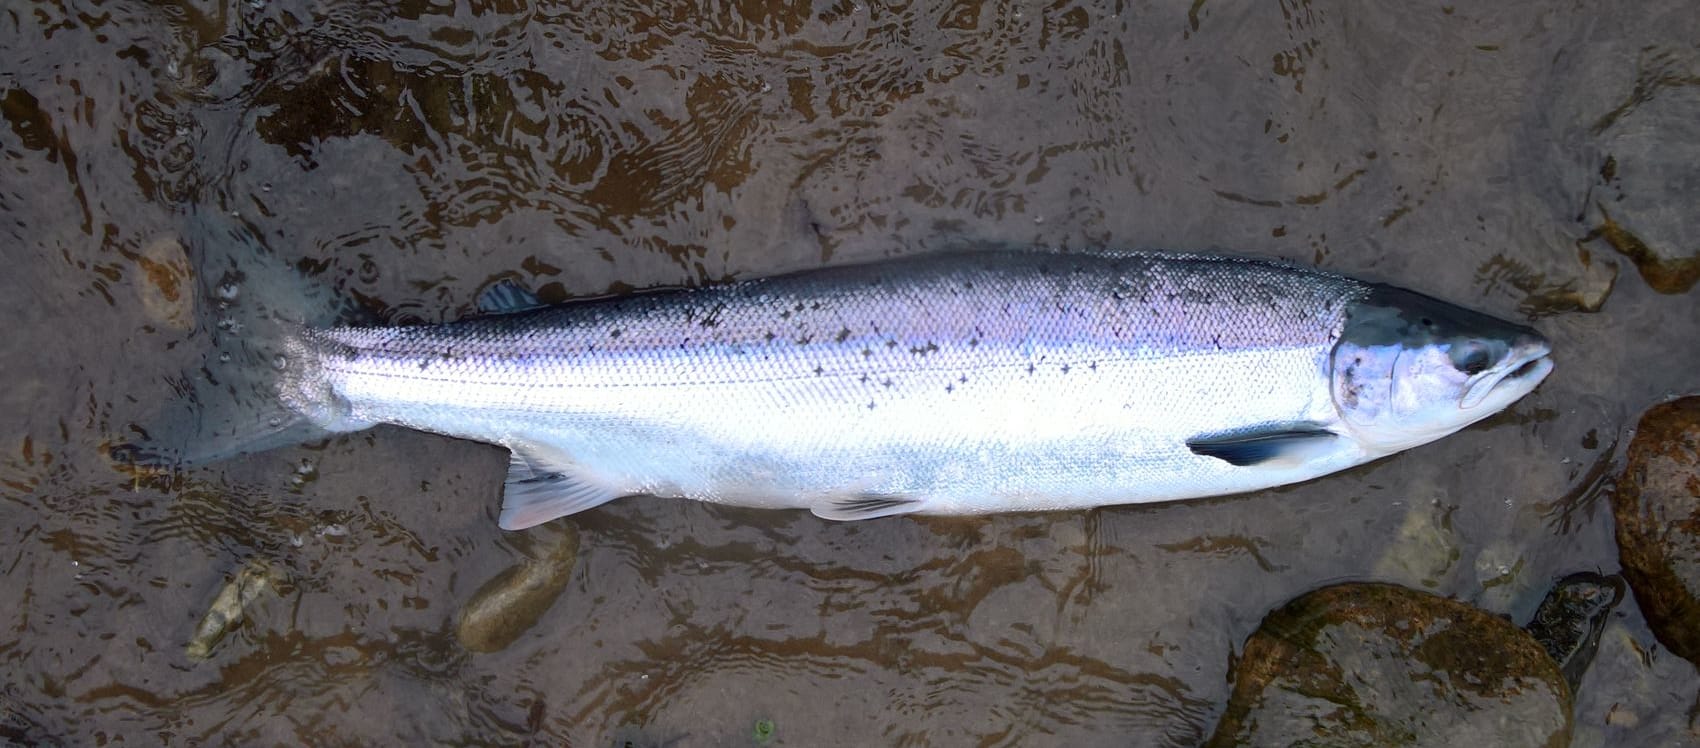 New Salmon & Trout Season Off To A Strong Start